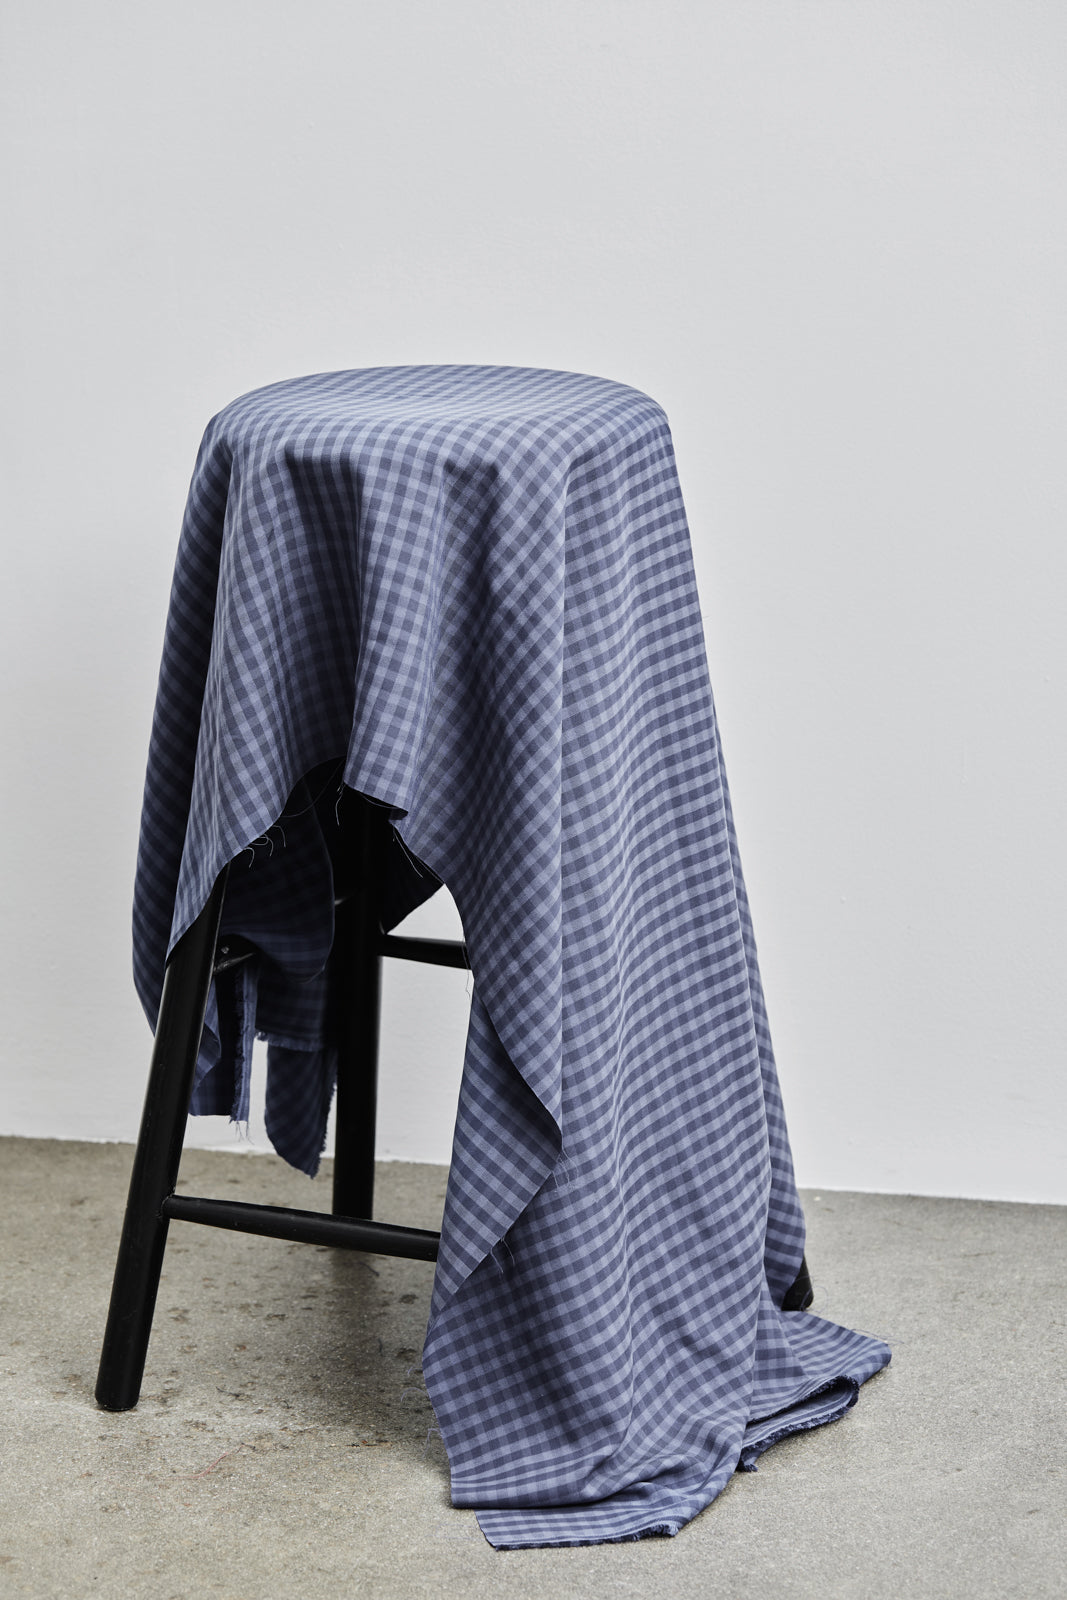 Meet MILK - Dusty Blue Two Tone Check with TENCEL™ Lyocell fibres